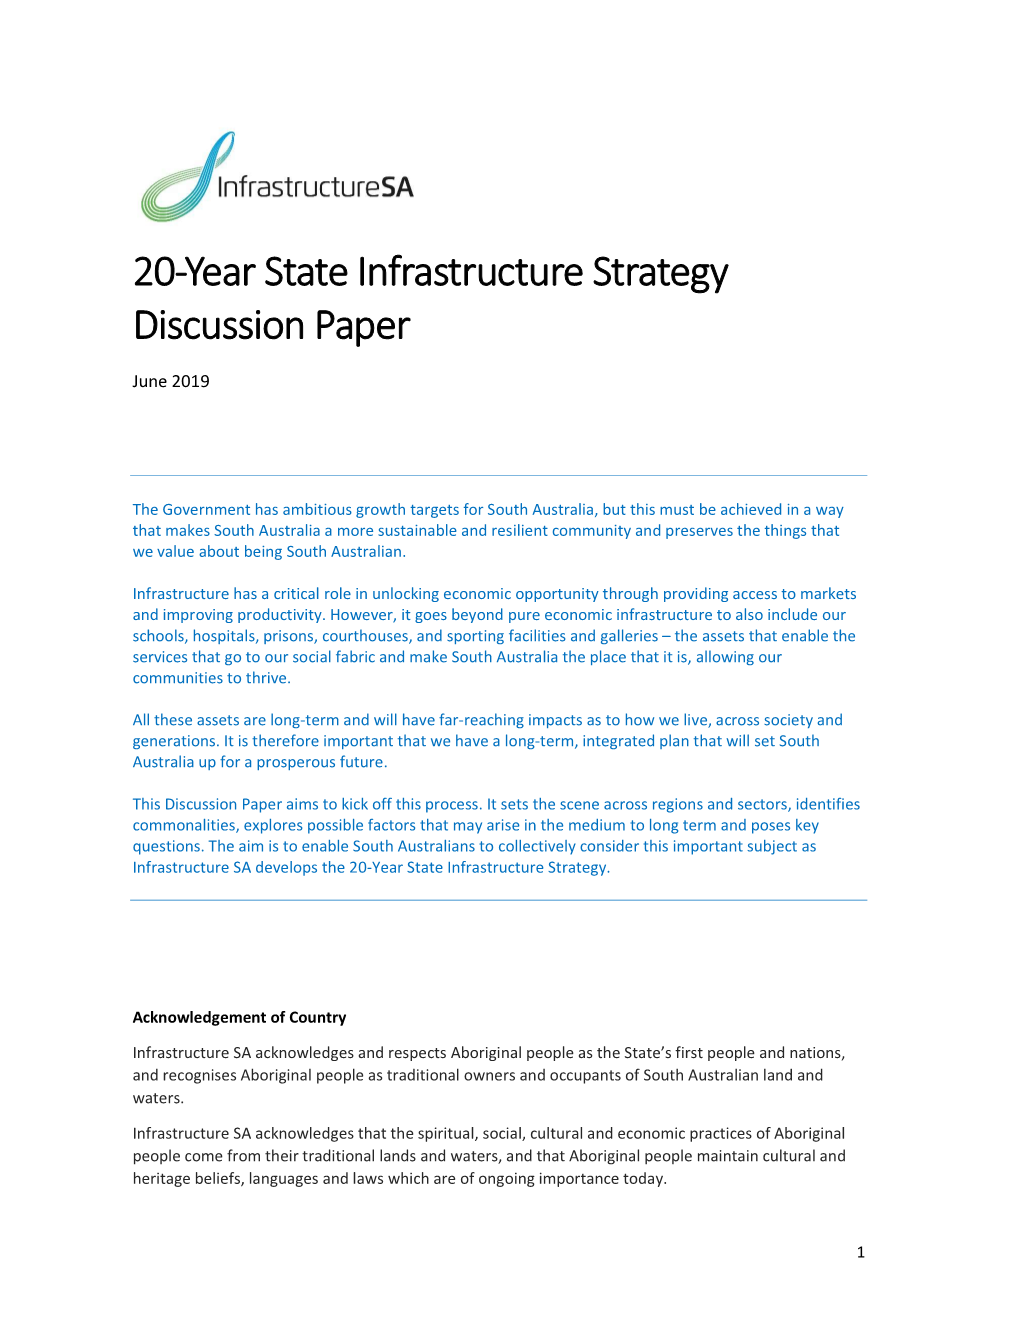 20-Year State Infrastructure Strategy Discussion Paper